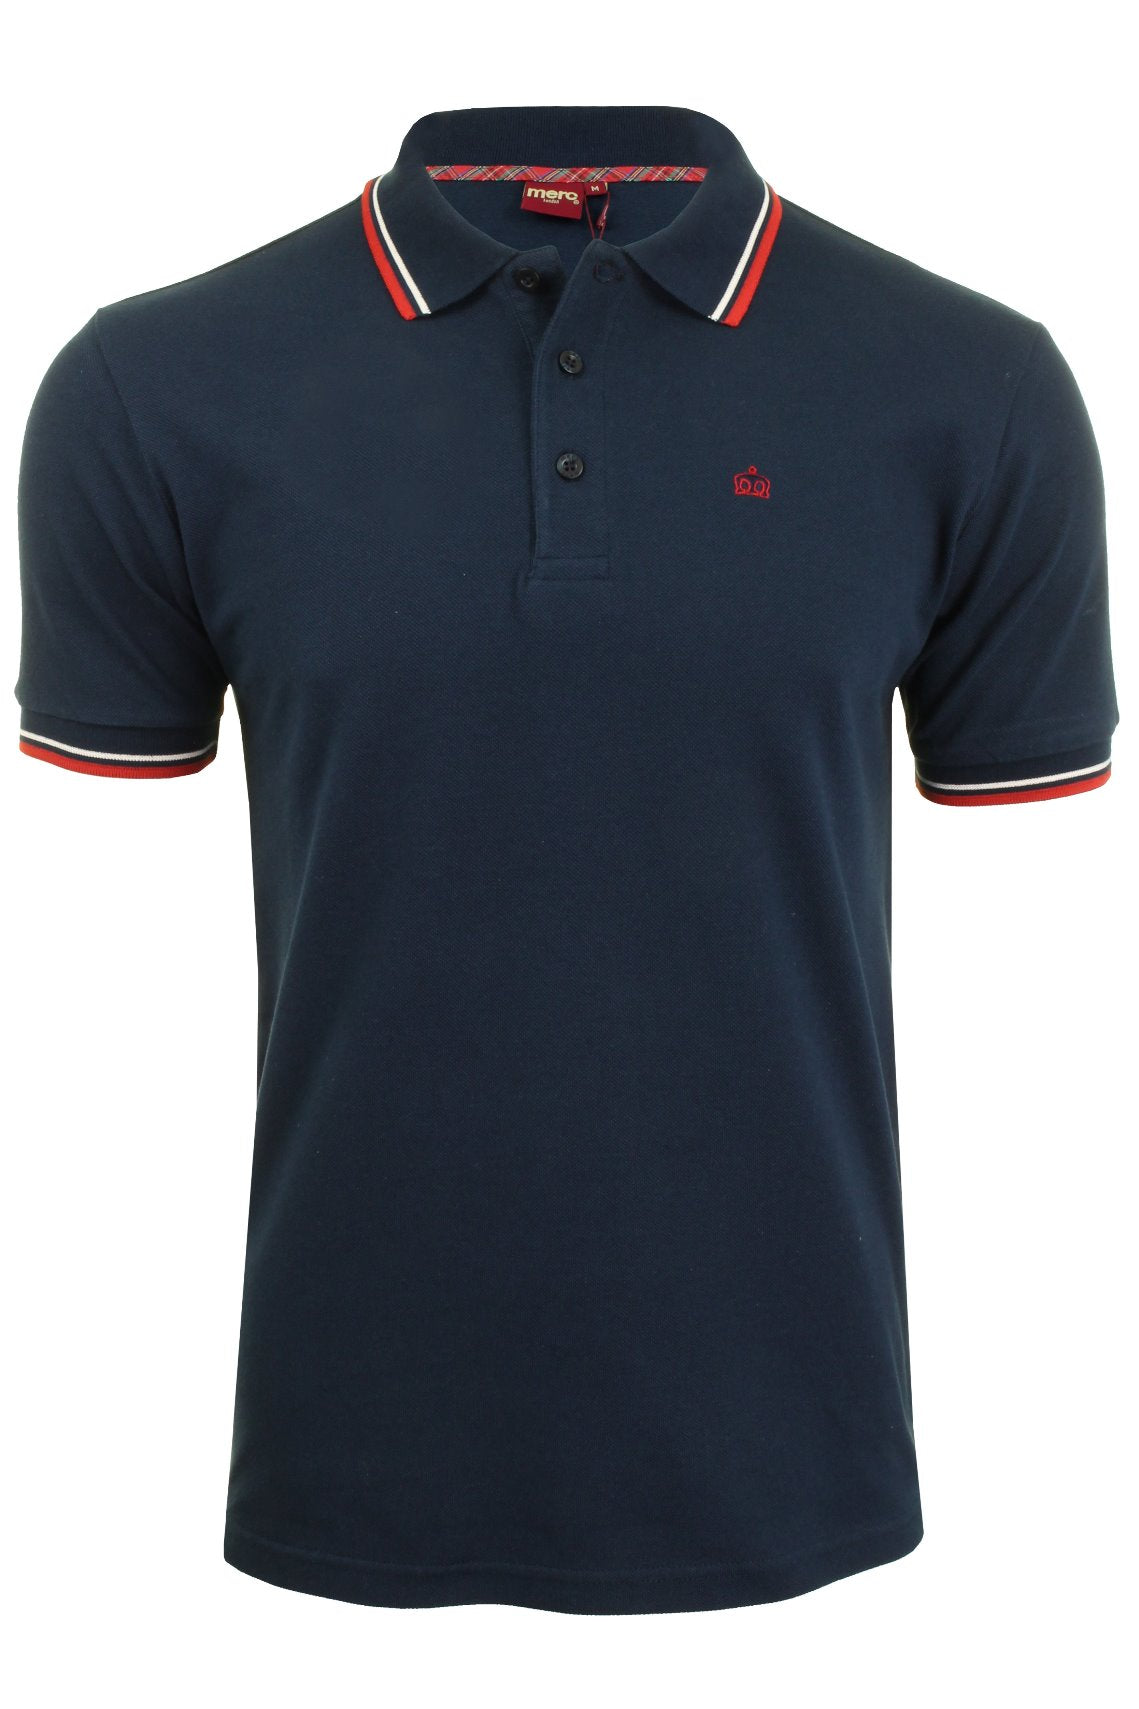 #group_navy-blue/-red